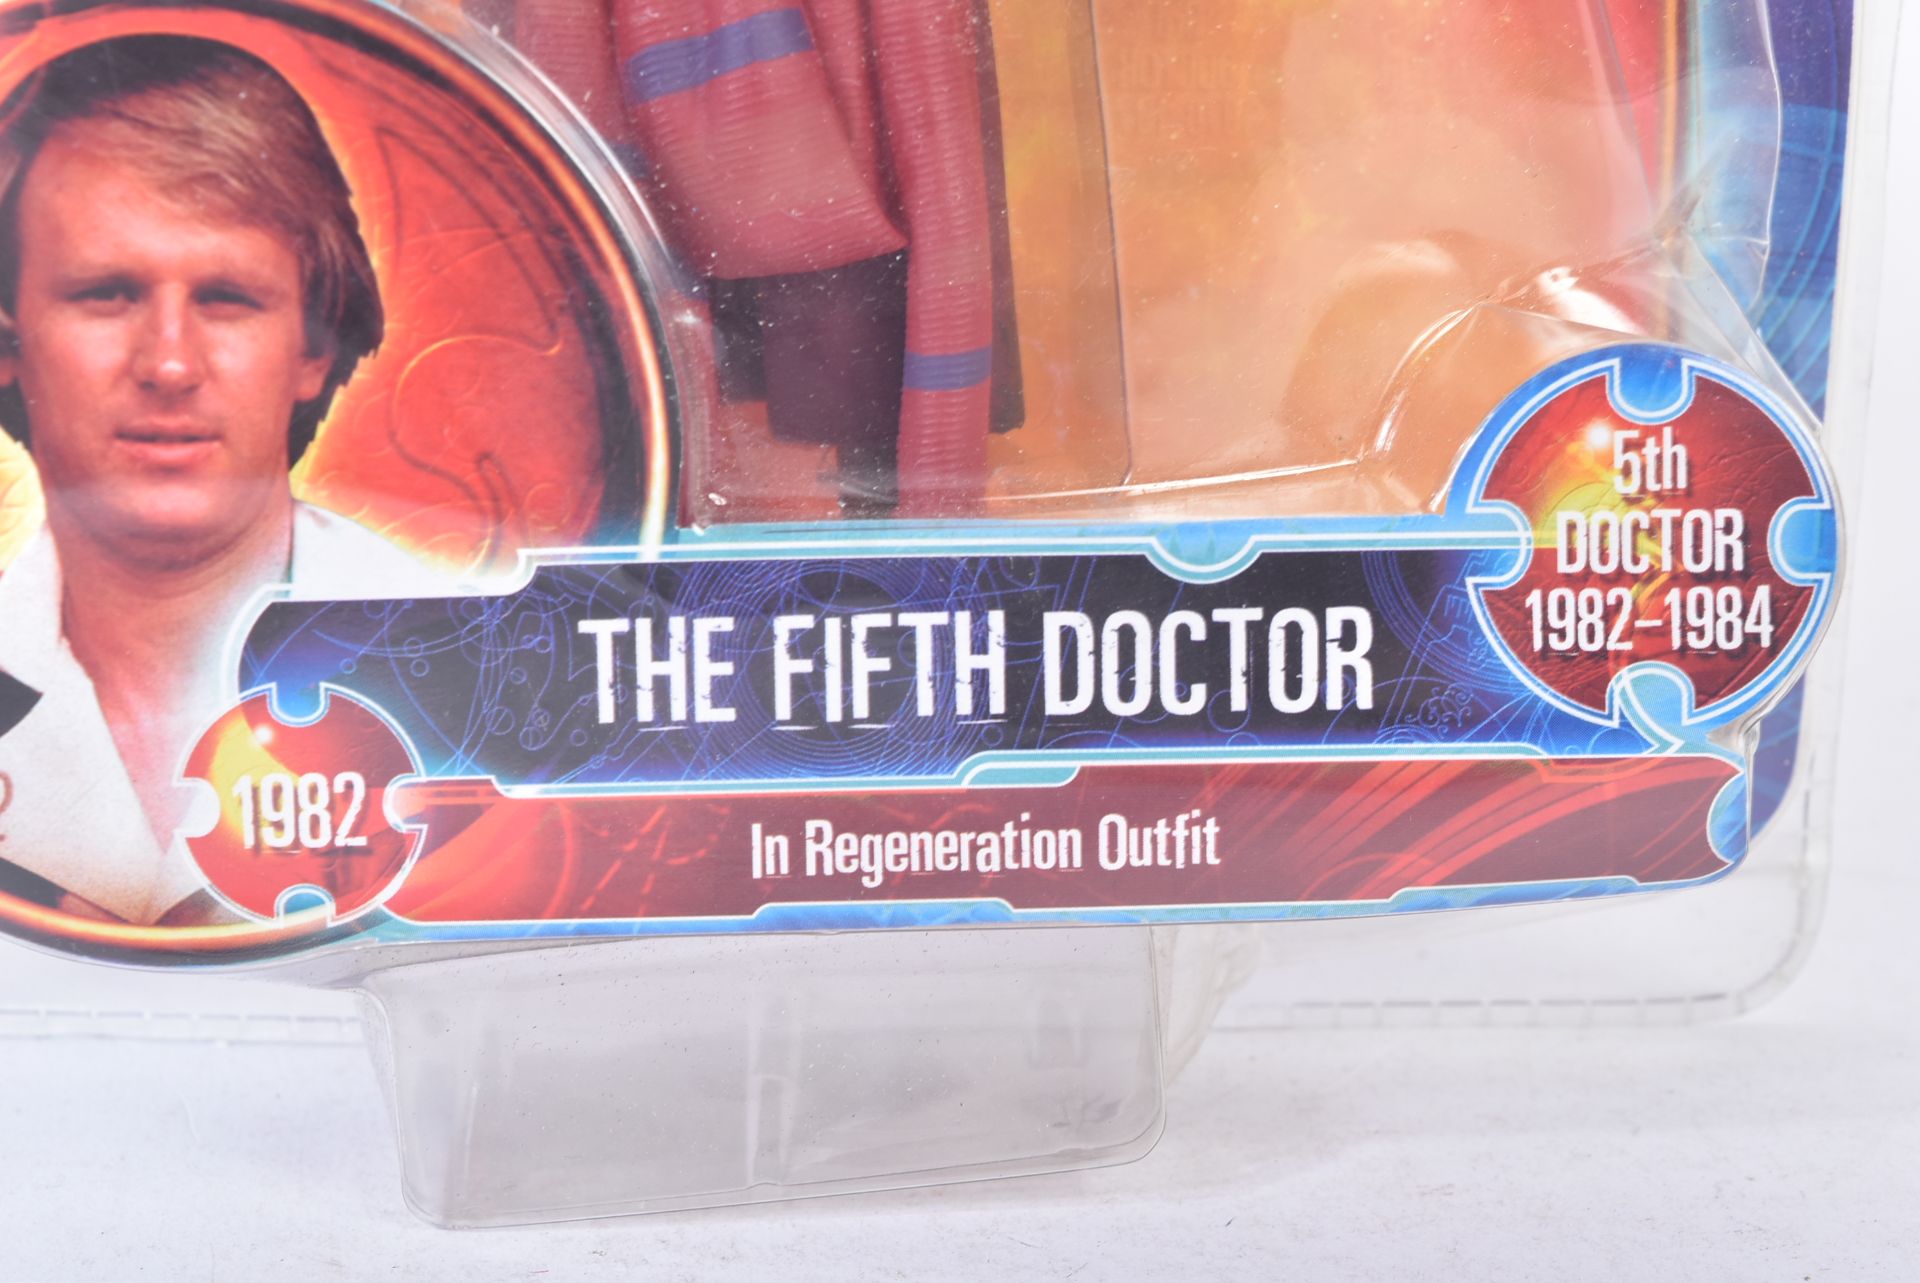 DOCTOR WHO - UNDERGROUND TOYS - FIFTH DOCTOR EXCLUSIVE - Image 2 of 4